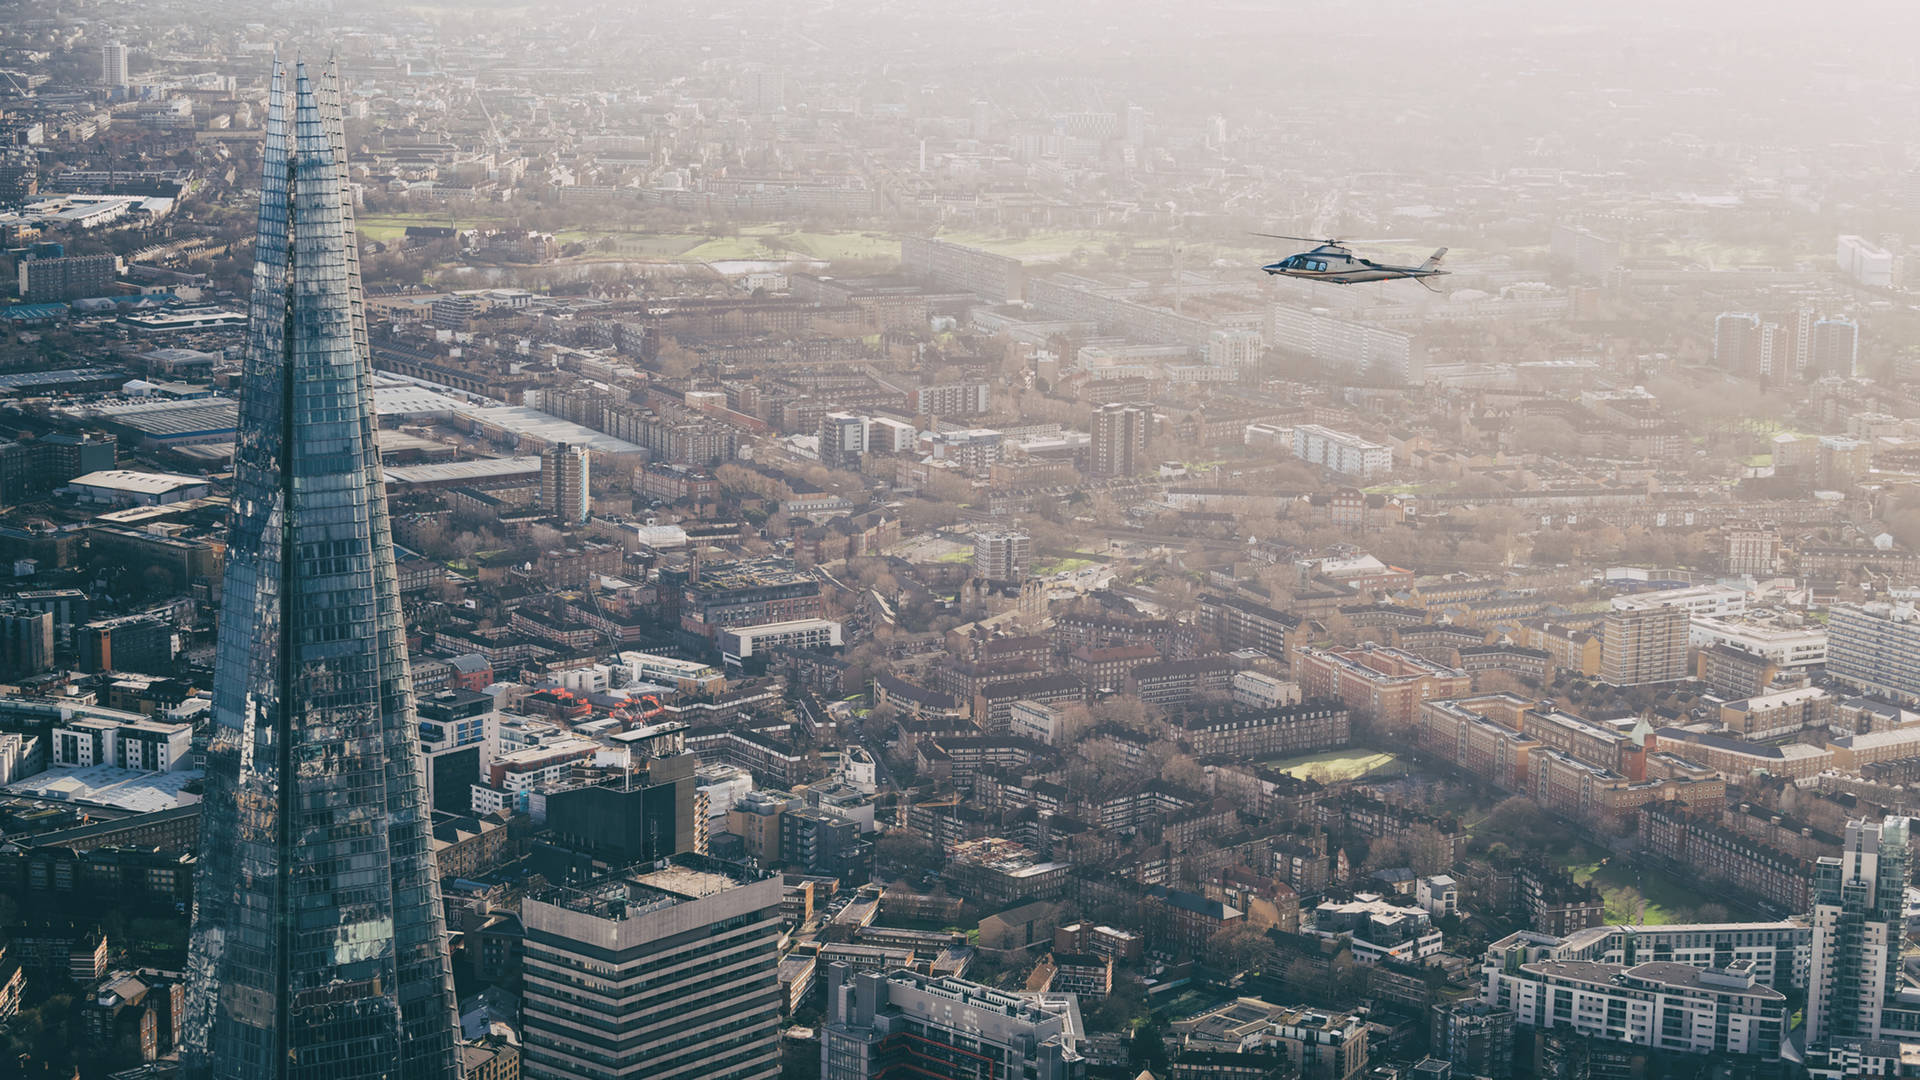 Helicopter trip over London